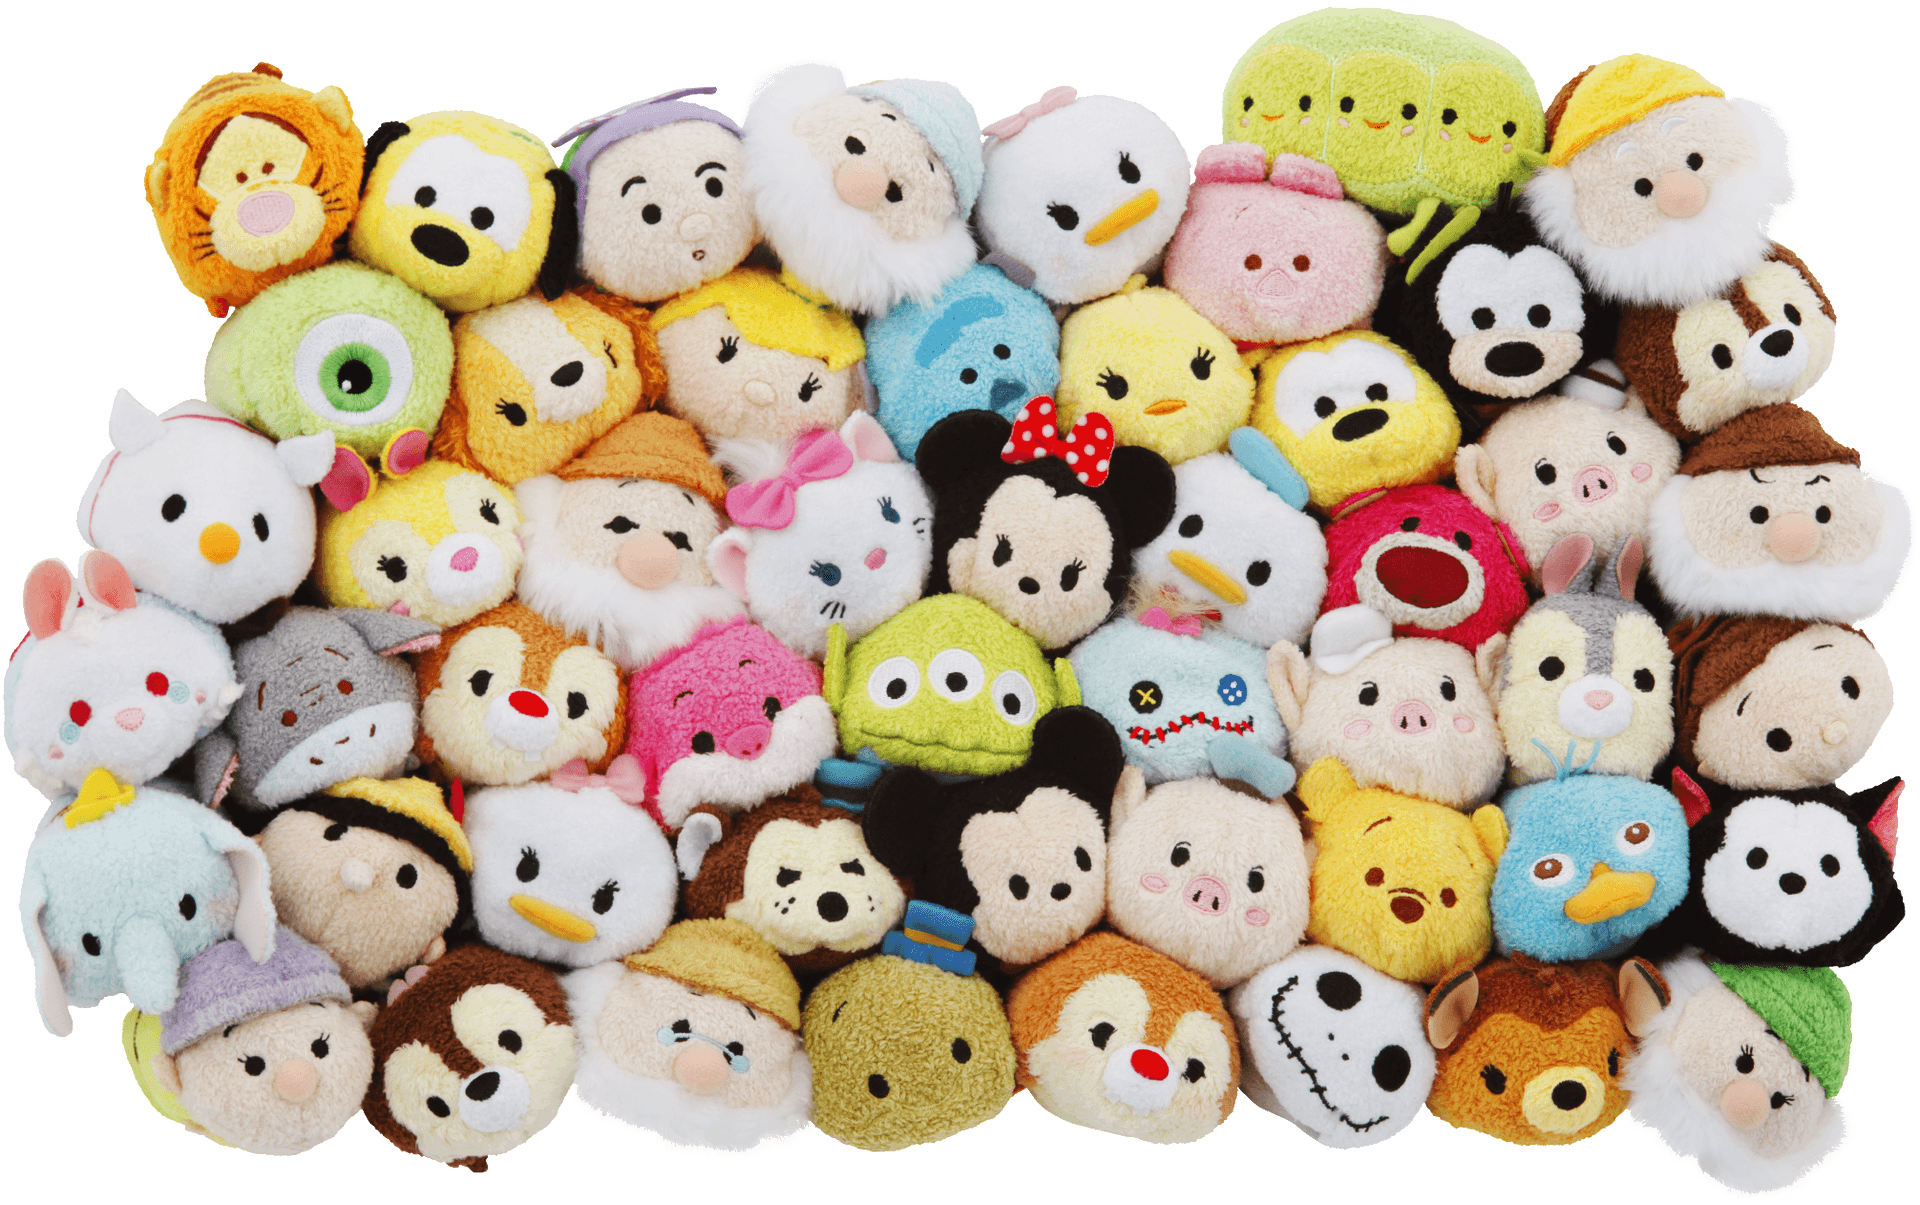 Assorted Disney Tsum Tsum Plush Collection PNG image